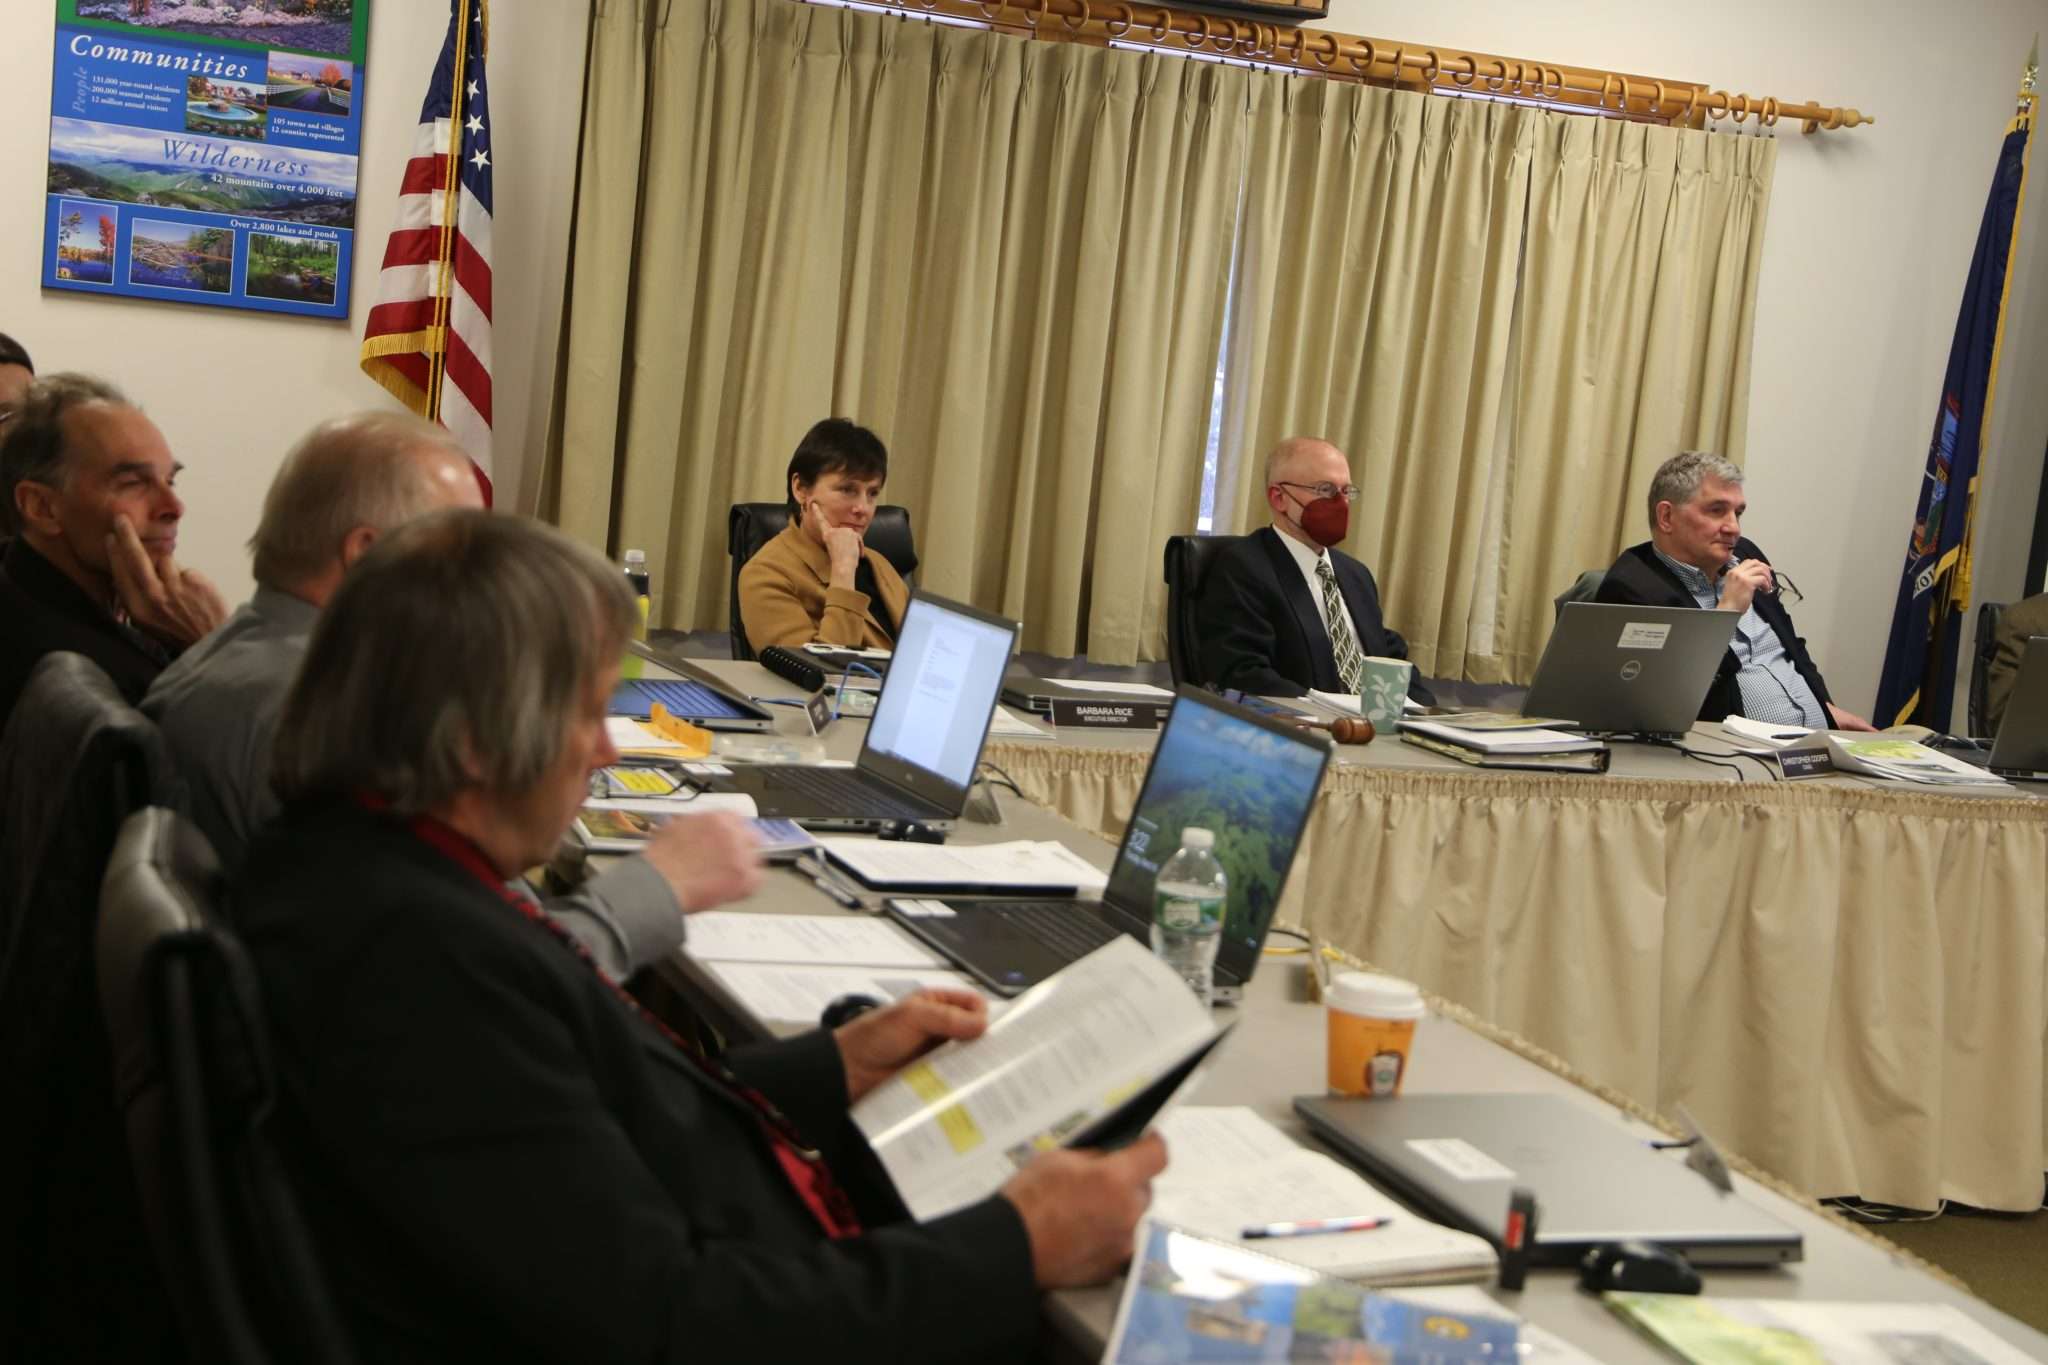 Members and staff of the Adirondack Park Agency sit around a table listening to a presentation during the March 16, 2023 meeting in Ray Brook.